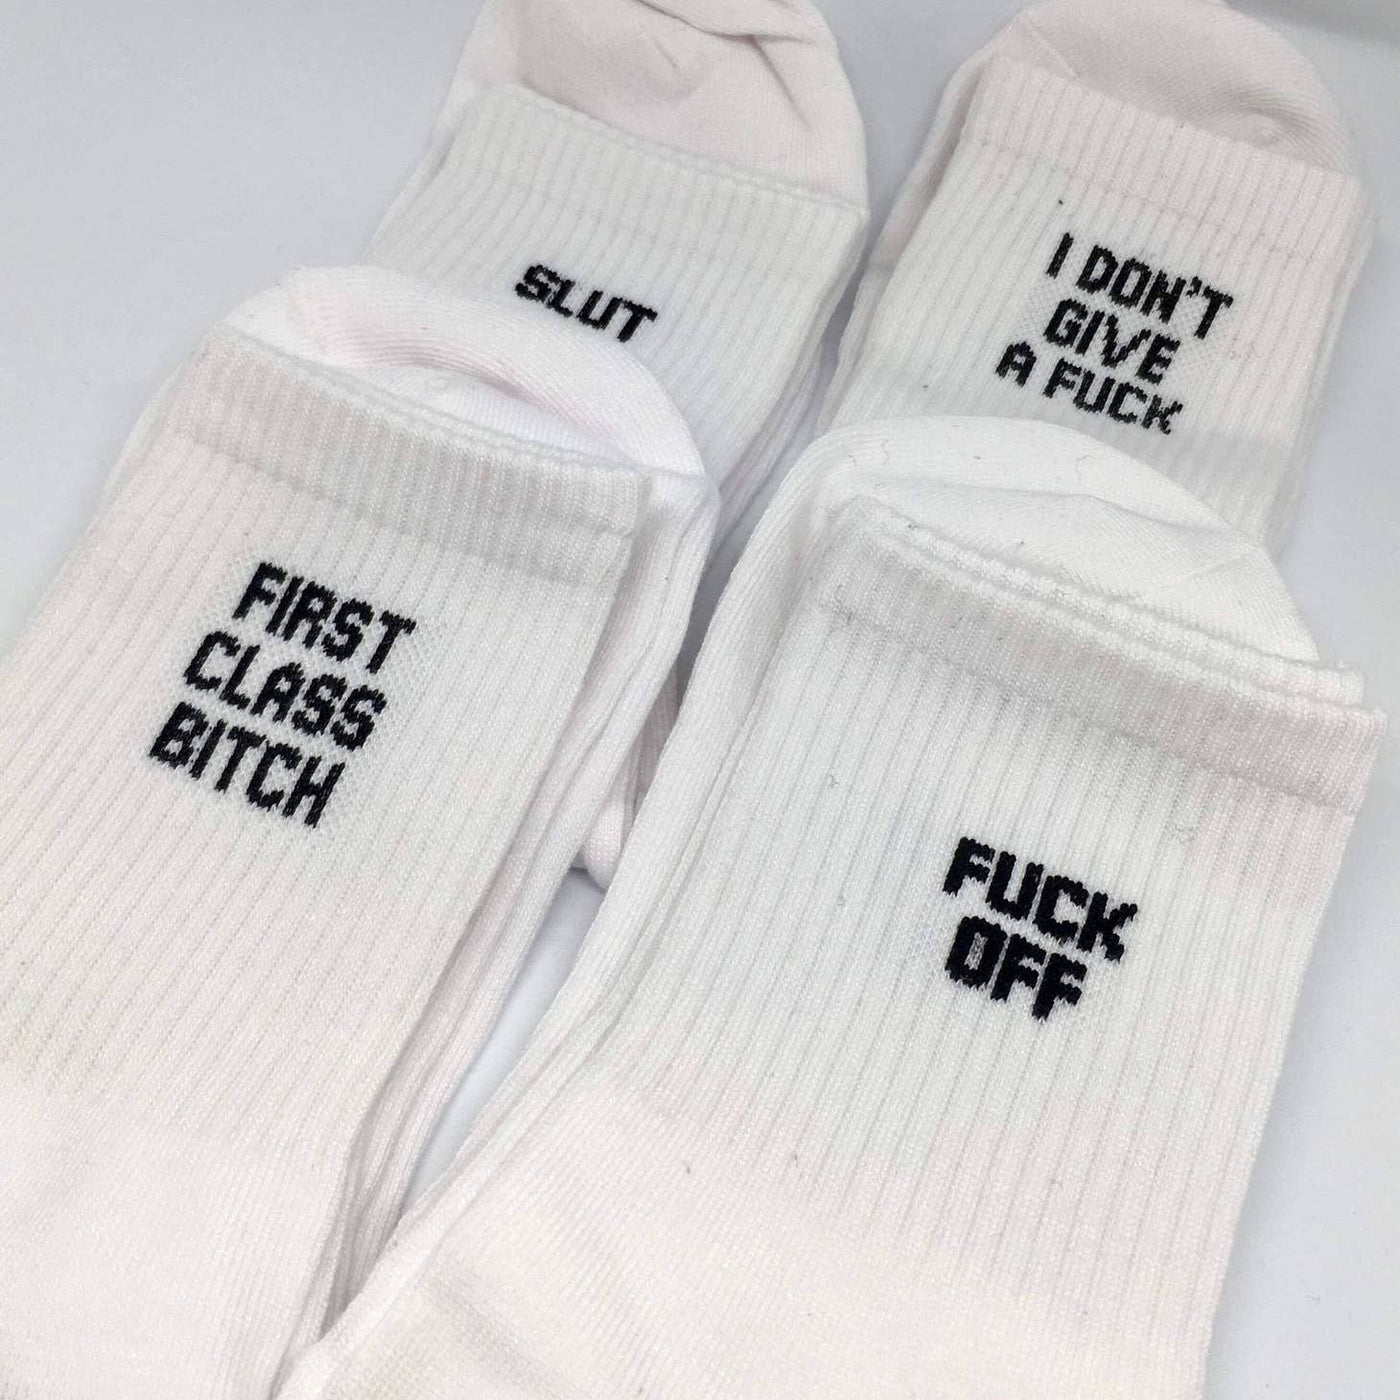 Rude White Cotton Socks - I don't give a F**ck